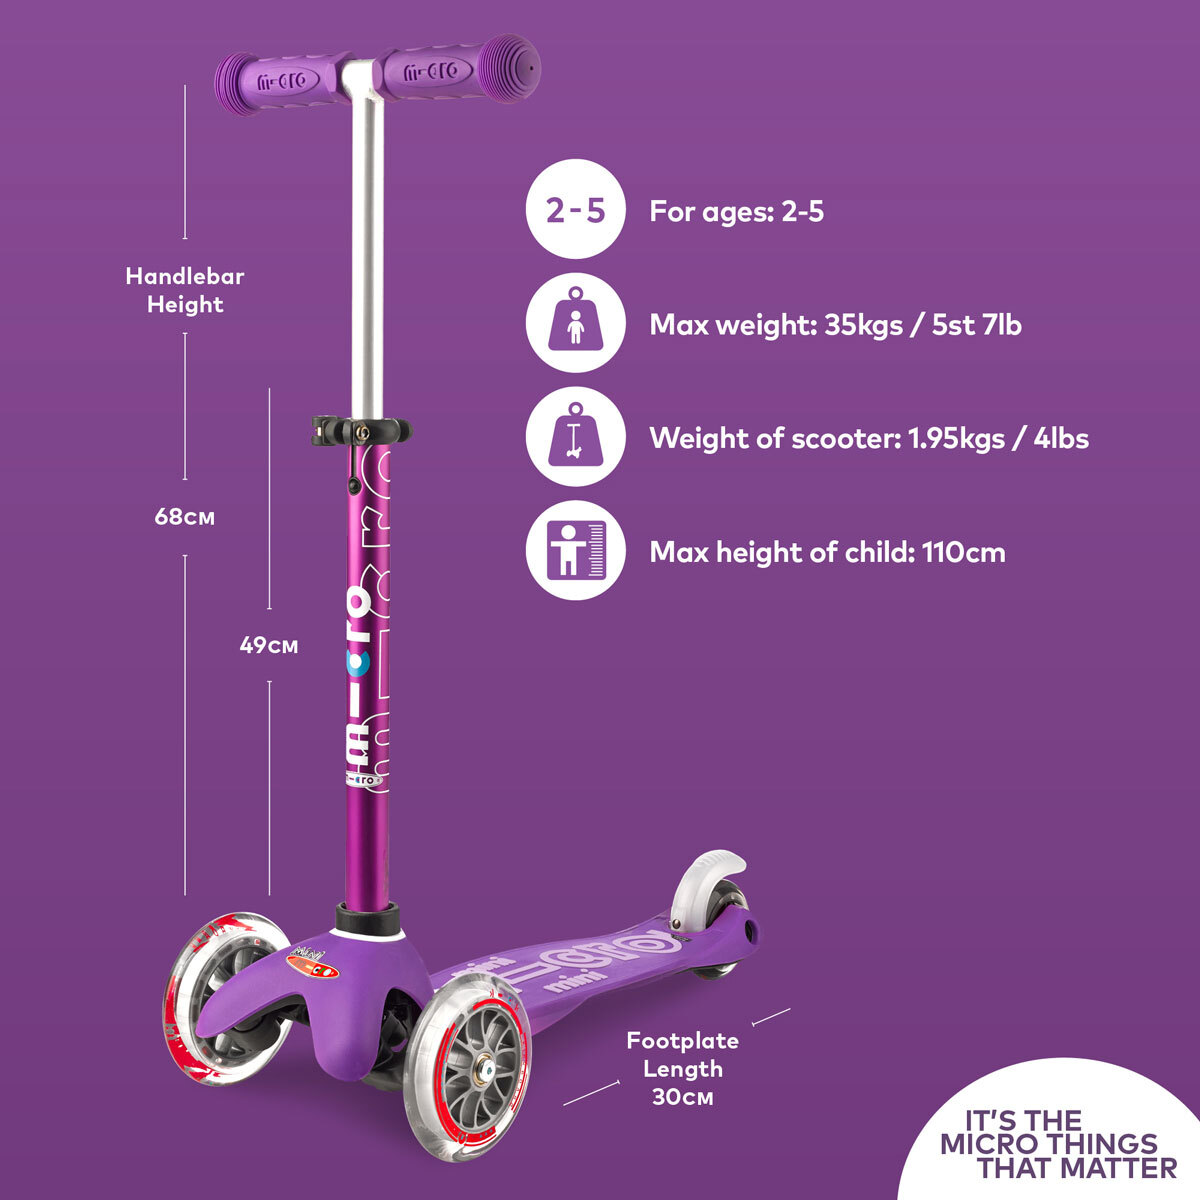 Micro Scooter in purple